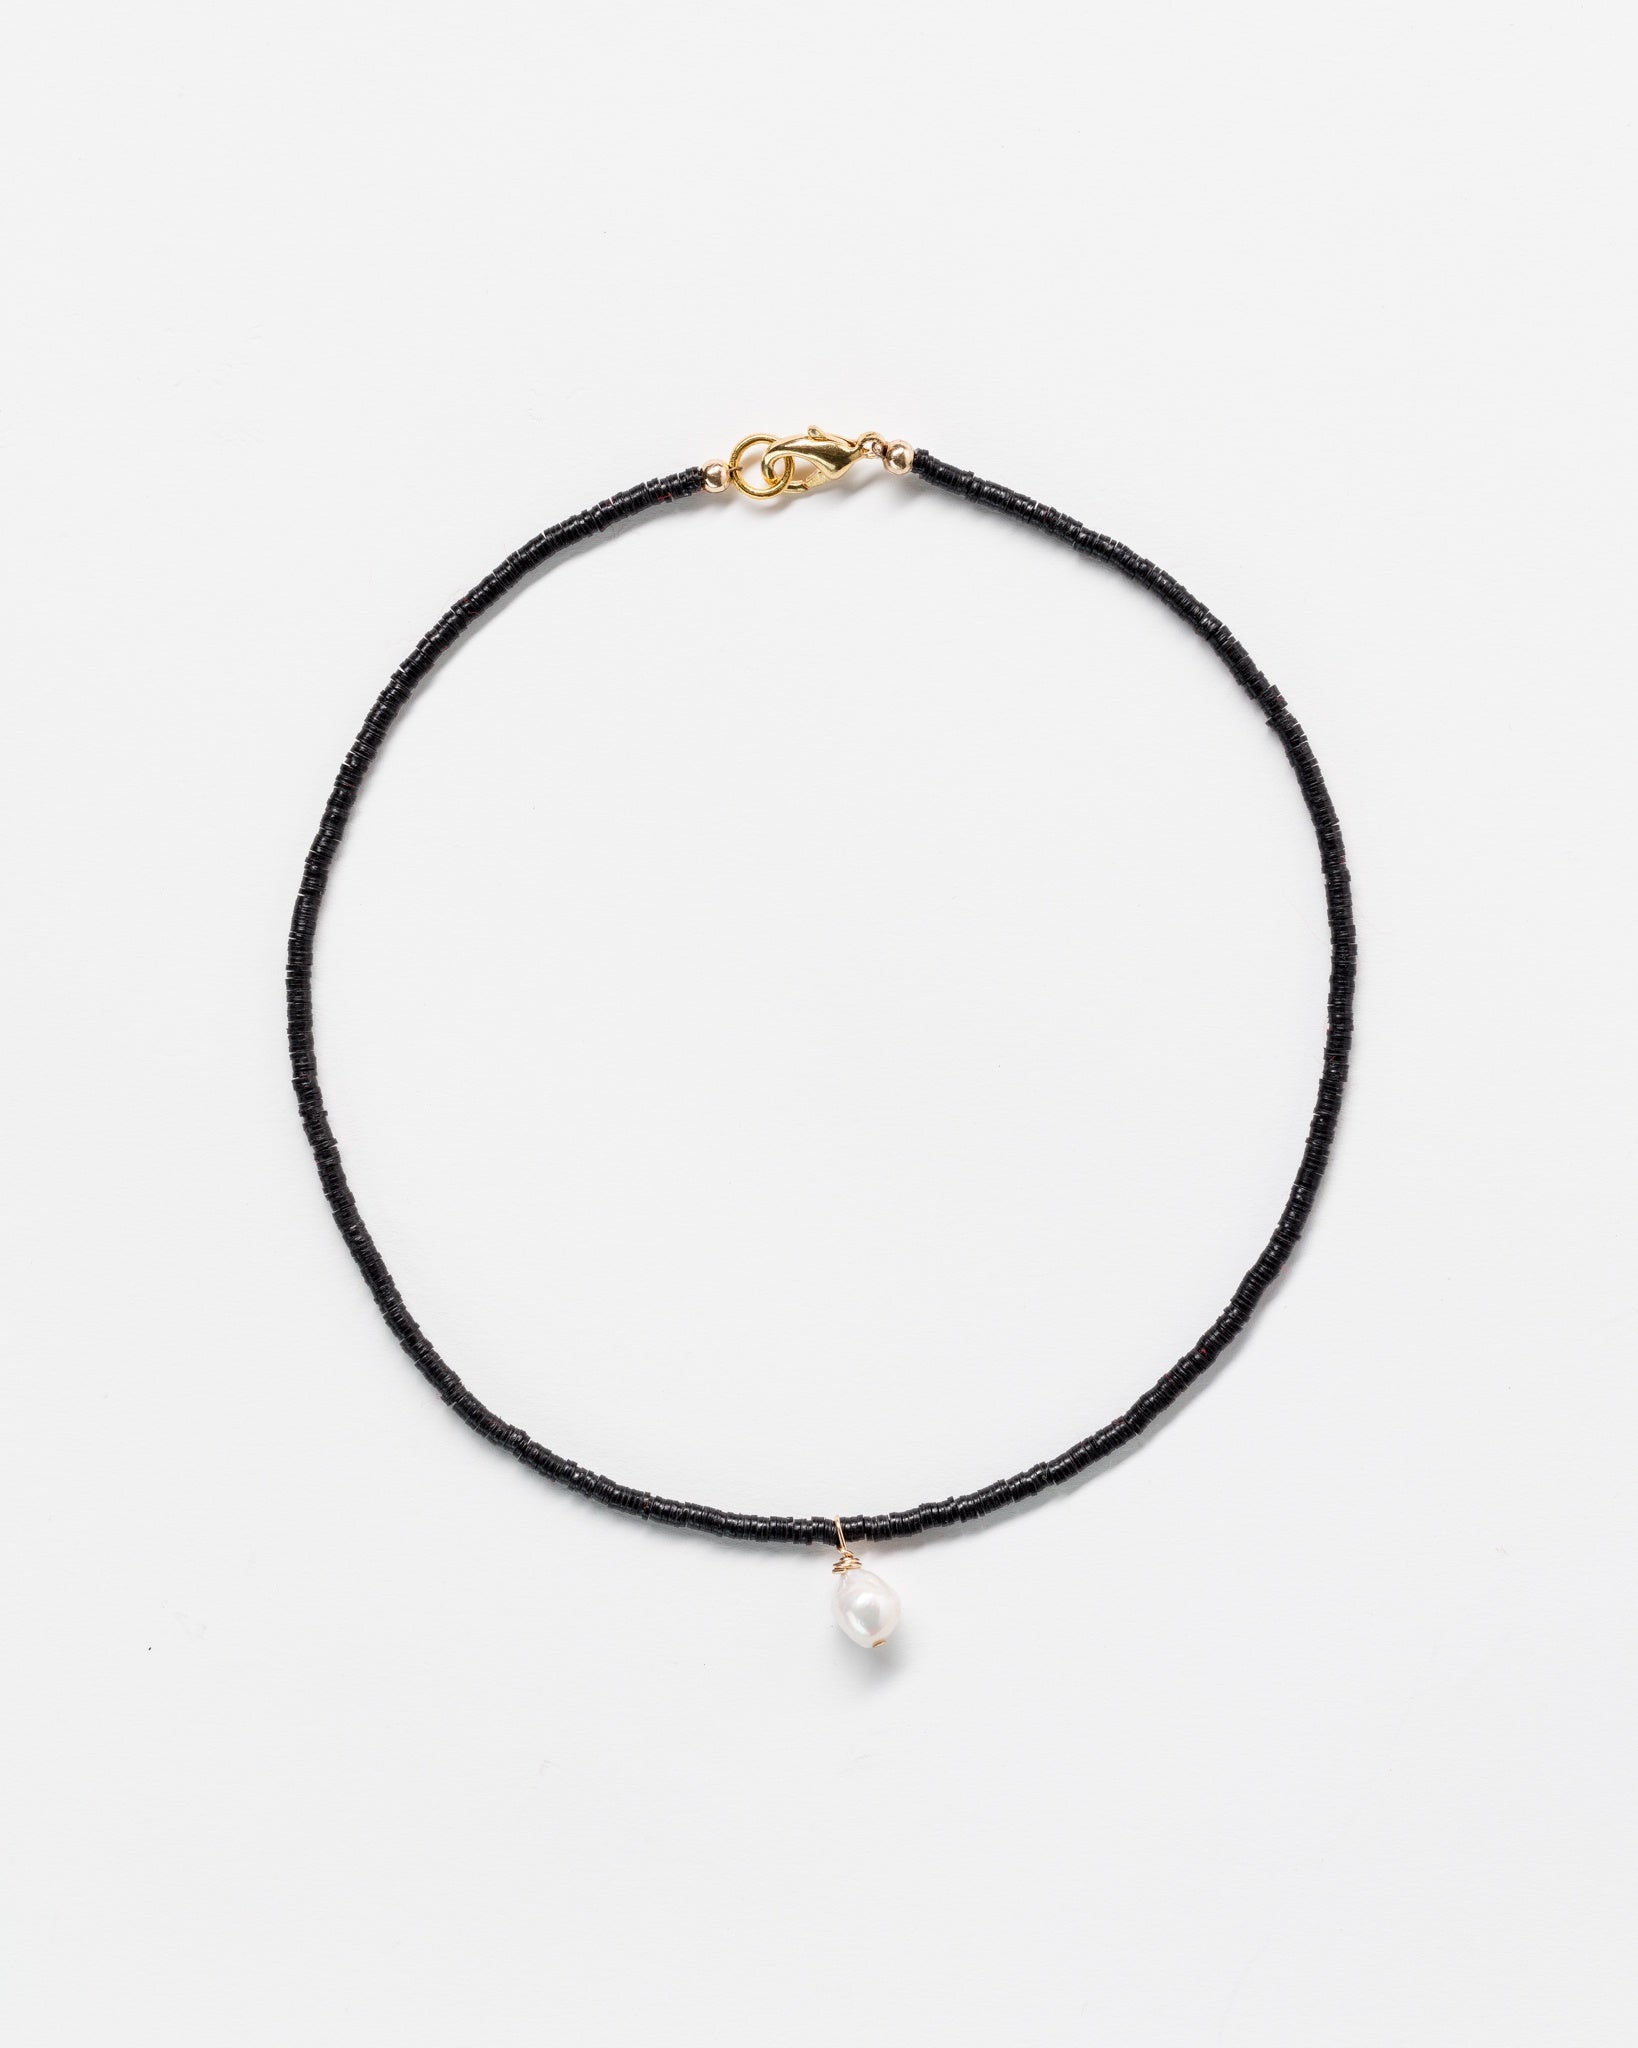 A delicate multi color Designs By Raya necklace with a single small pearl pendant, featuring a golden clasp in Arizona style, displayed on a plain white background.